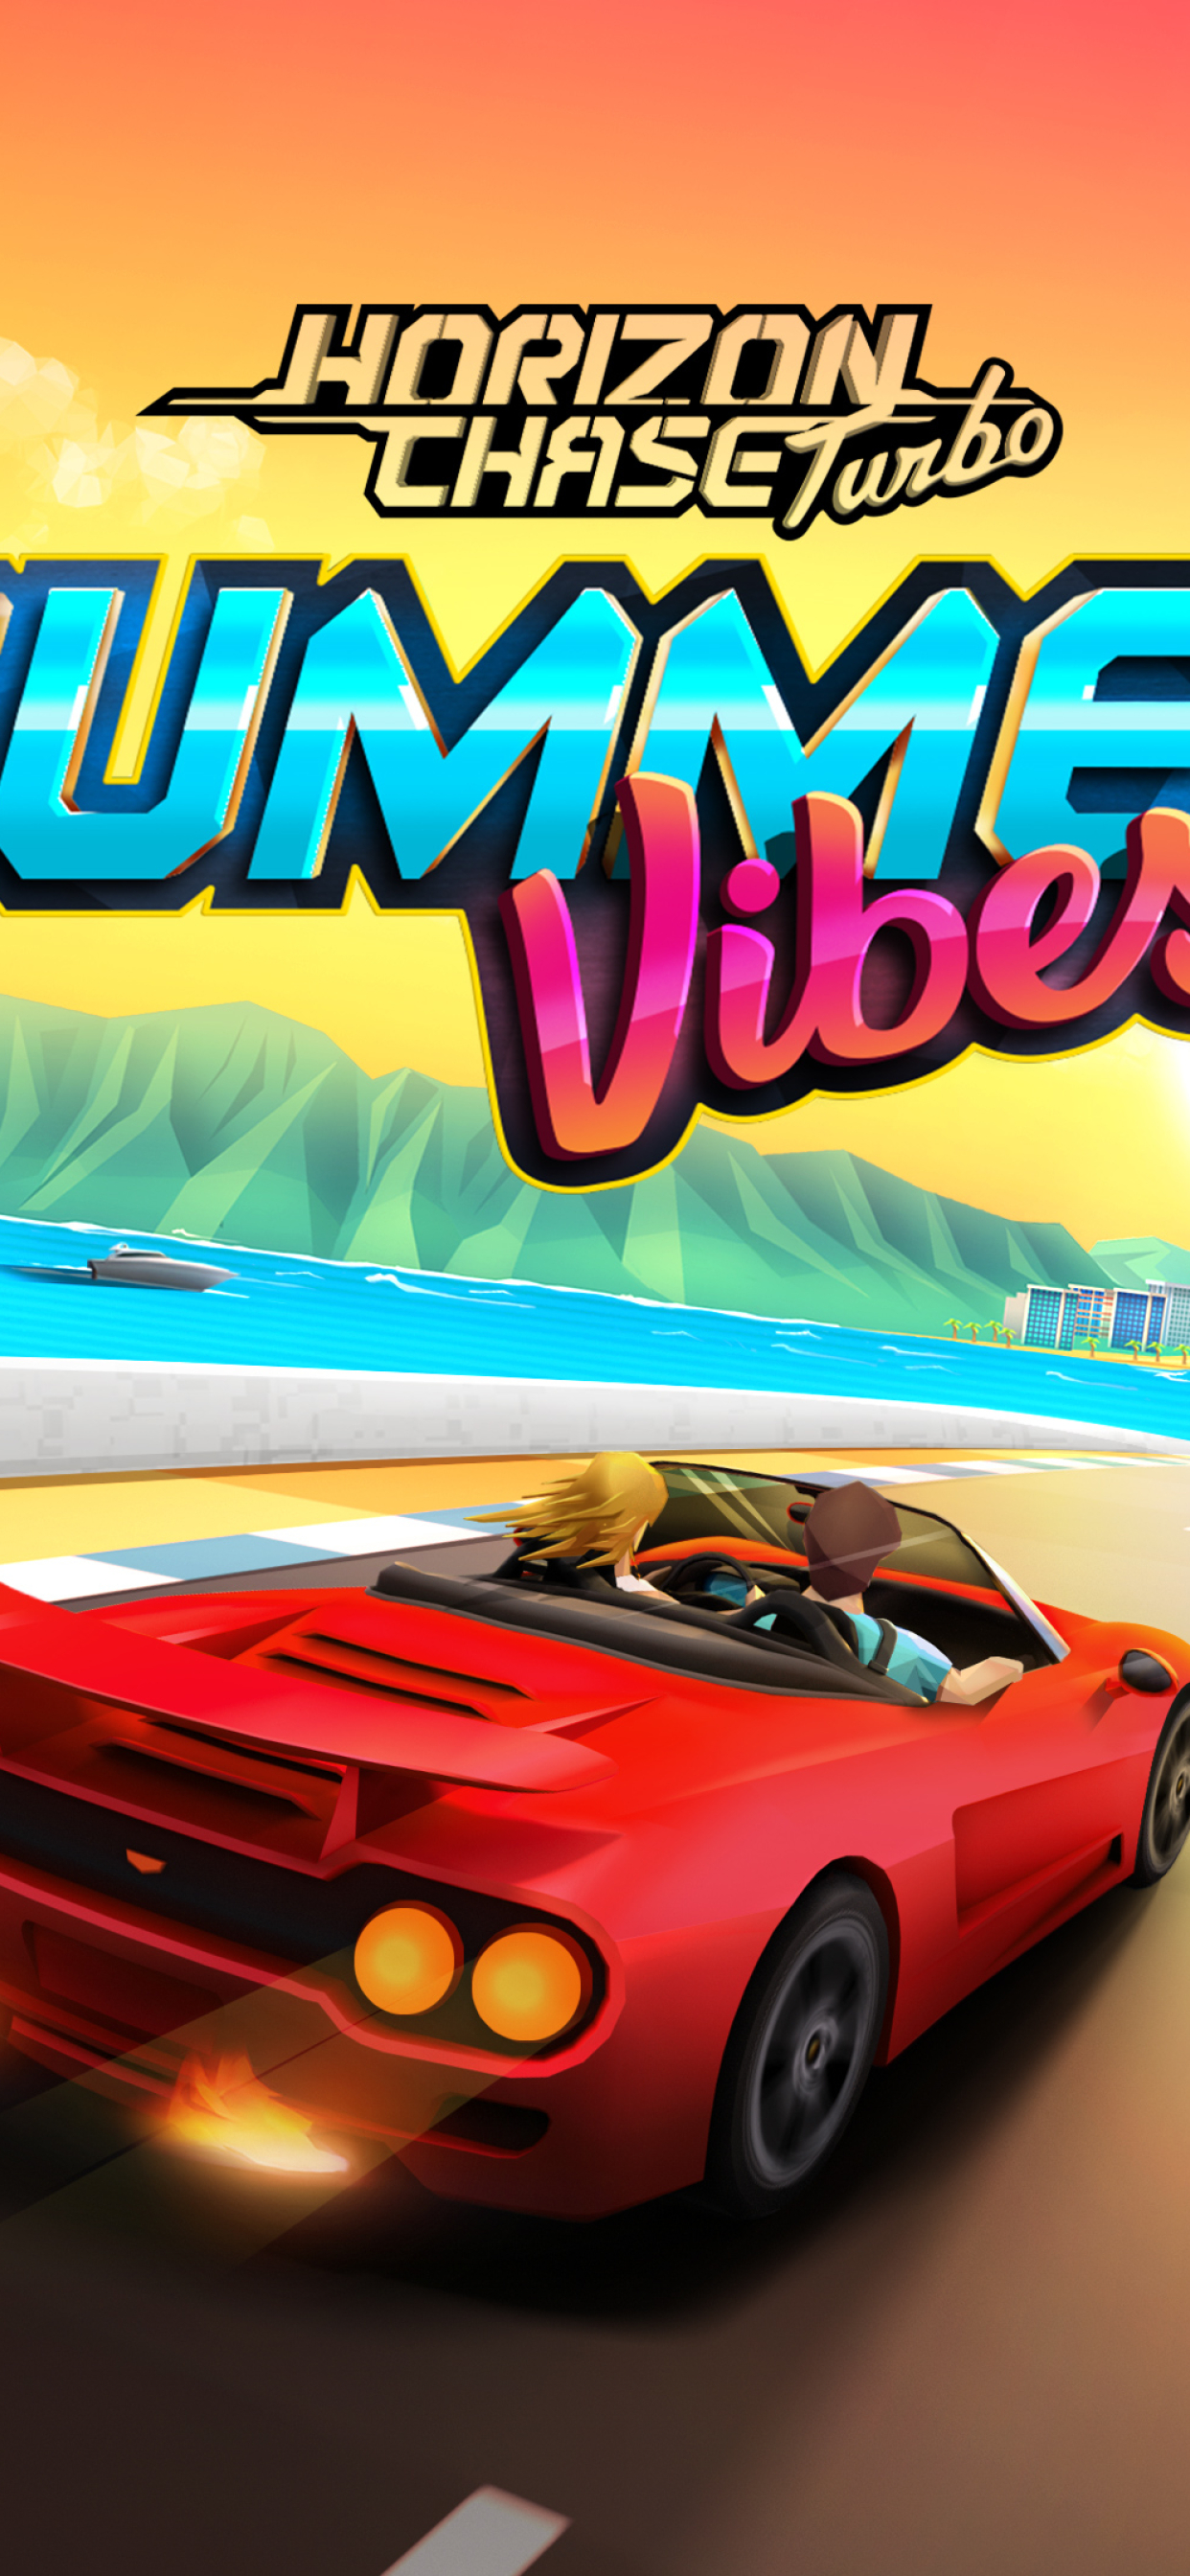 1242x26 Horizon Chase Turbo Summer Vibes Iphone Xs Max Wallpaper Hd Games 4k Wallpapers Images Photos And Background